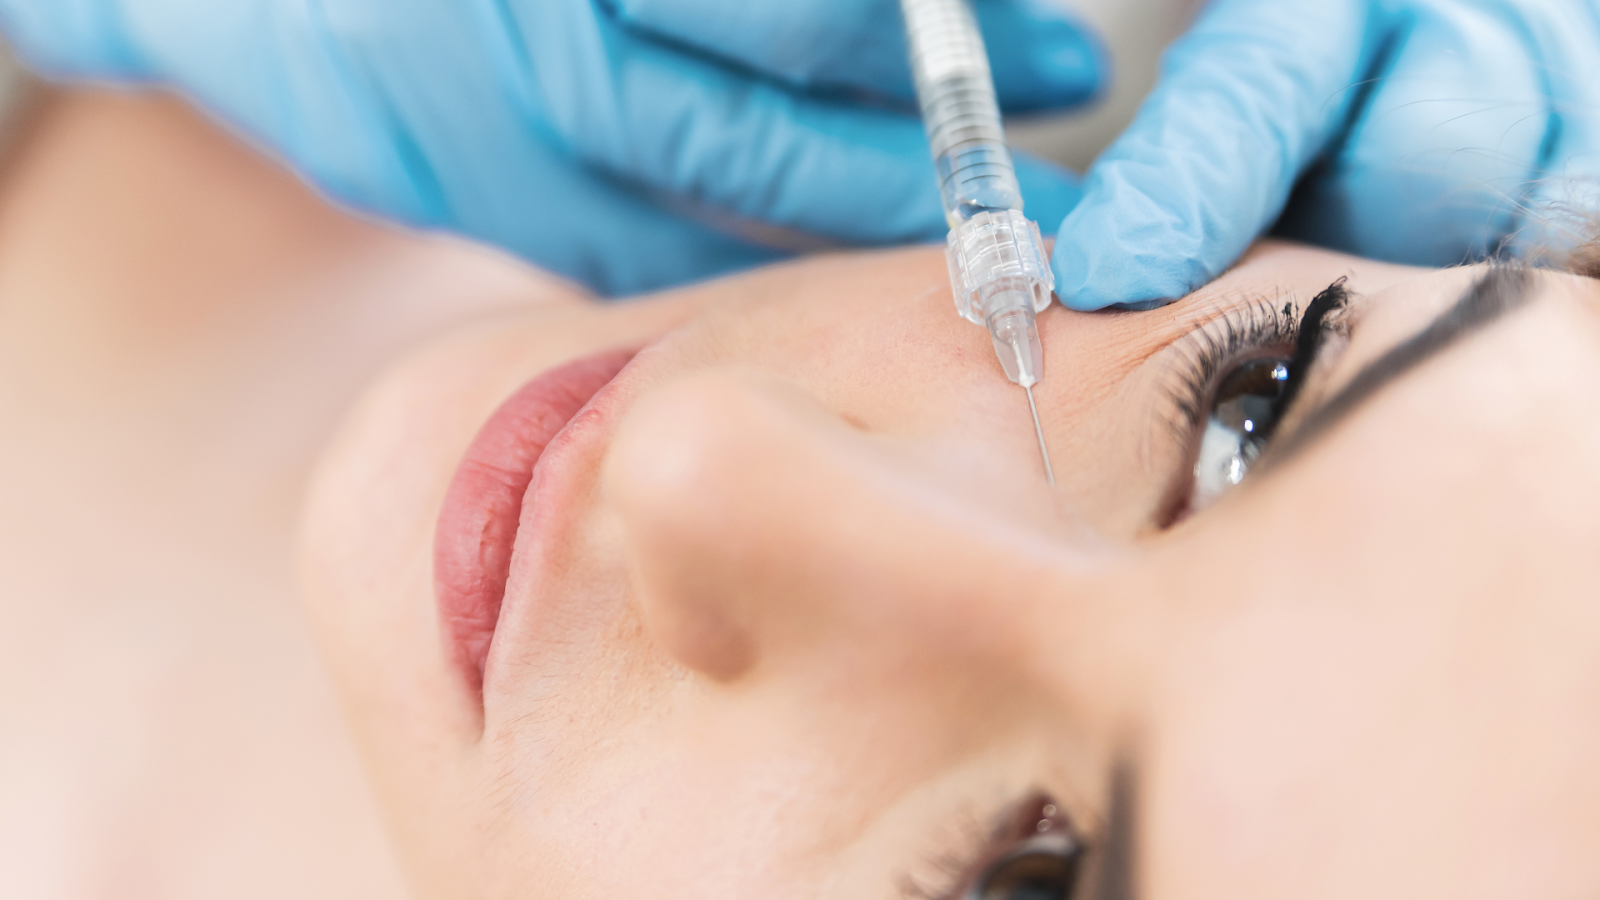 A female patient receives under eye injections to enhance and revitalize her appearance.